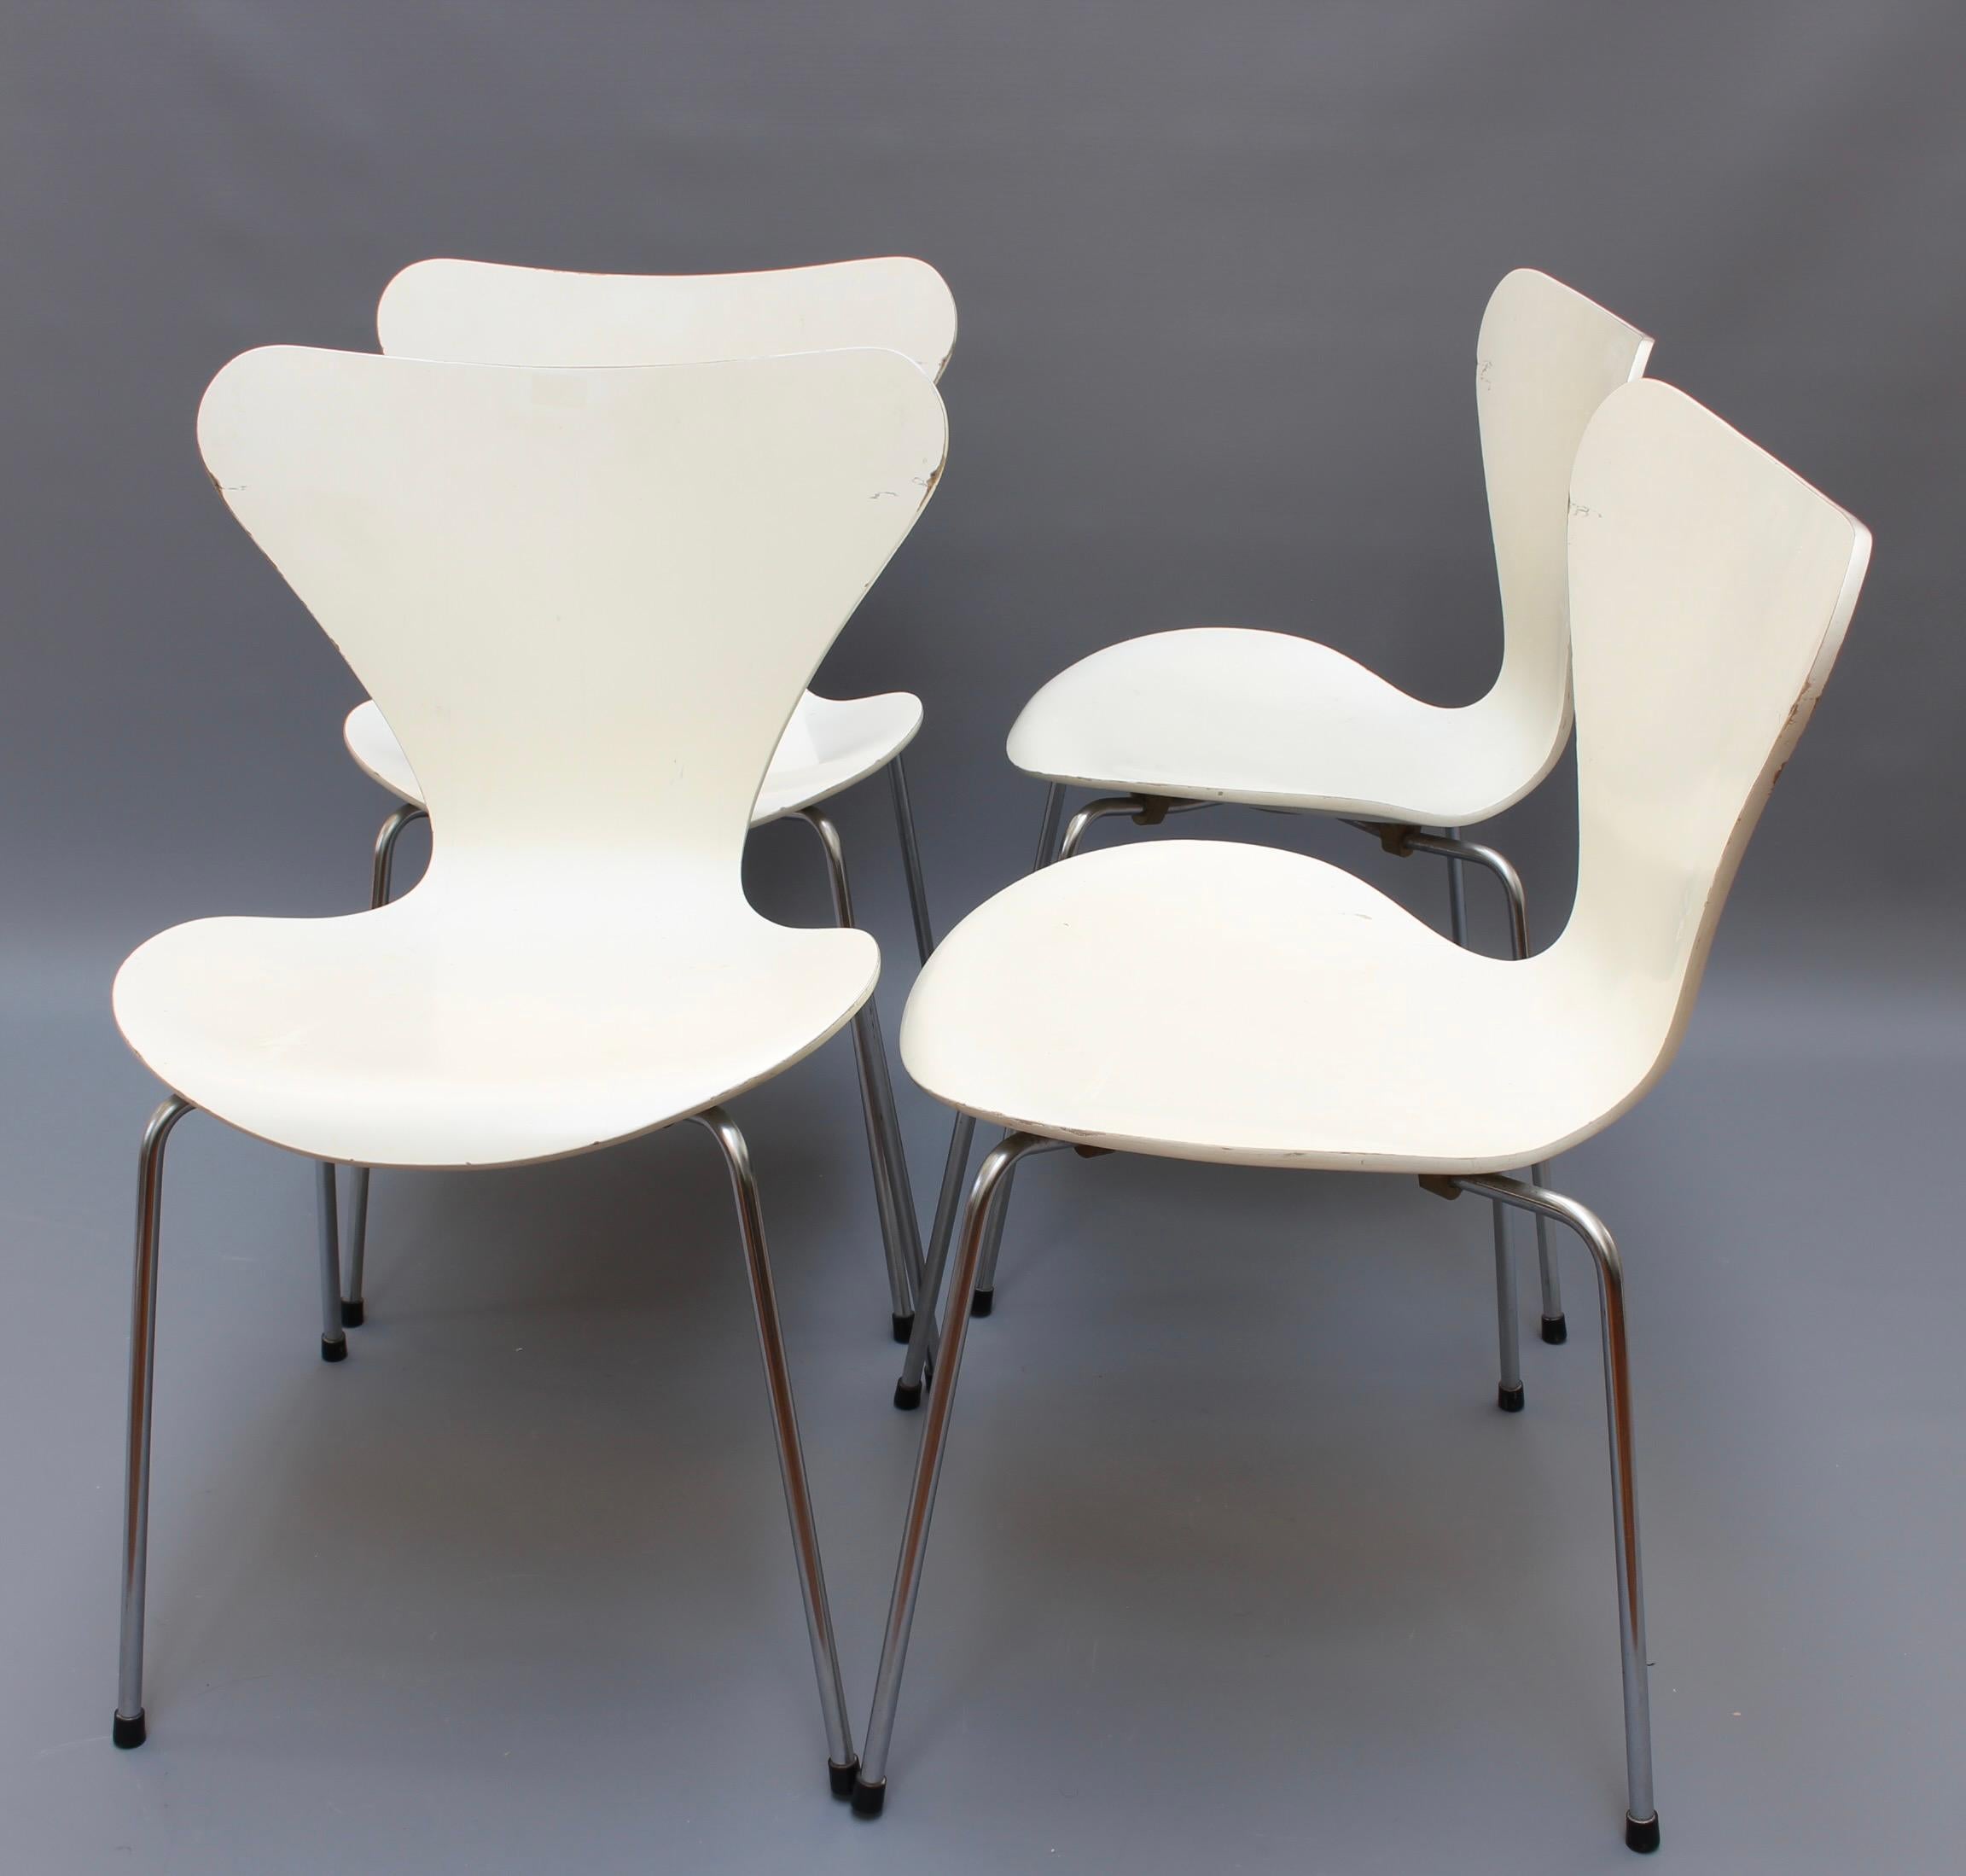 Set of four 'Series 7' stacking white chairs by Arne Jacobsen for Fritz Hansen (1973). Iconic creation by this designer - this set manufactured in 1973 - each with a painted and moulded seat raised on a chromed 'X' frame support. Overall in fair